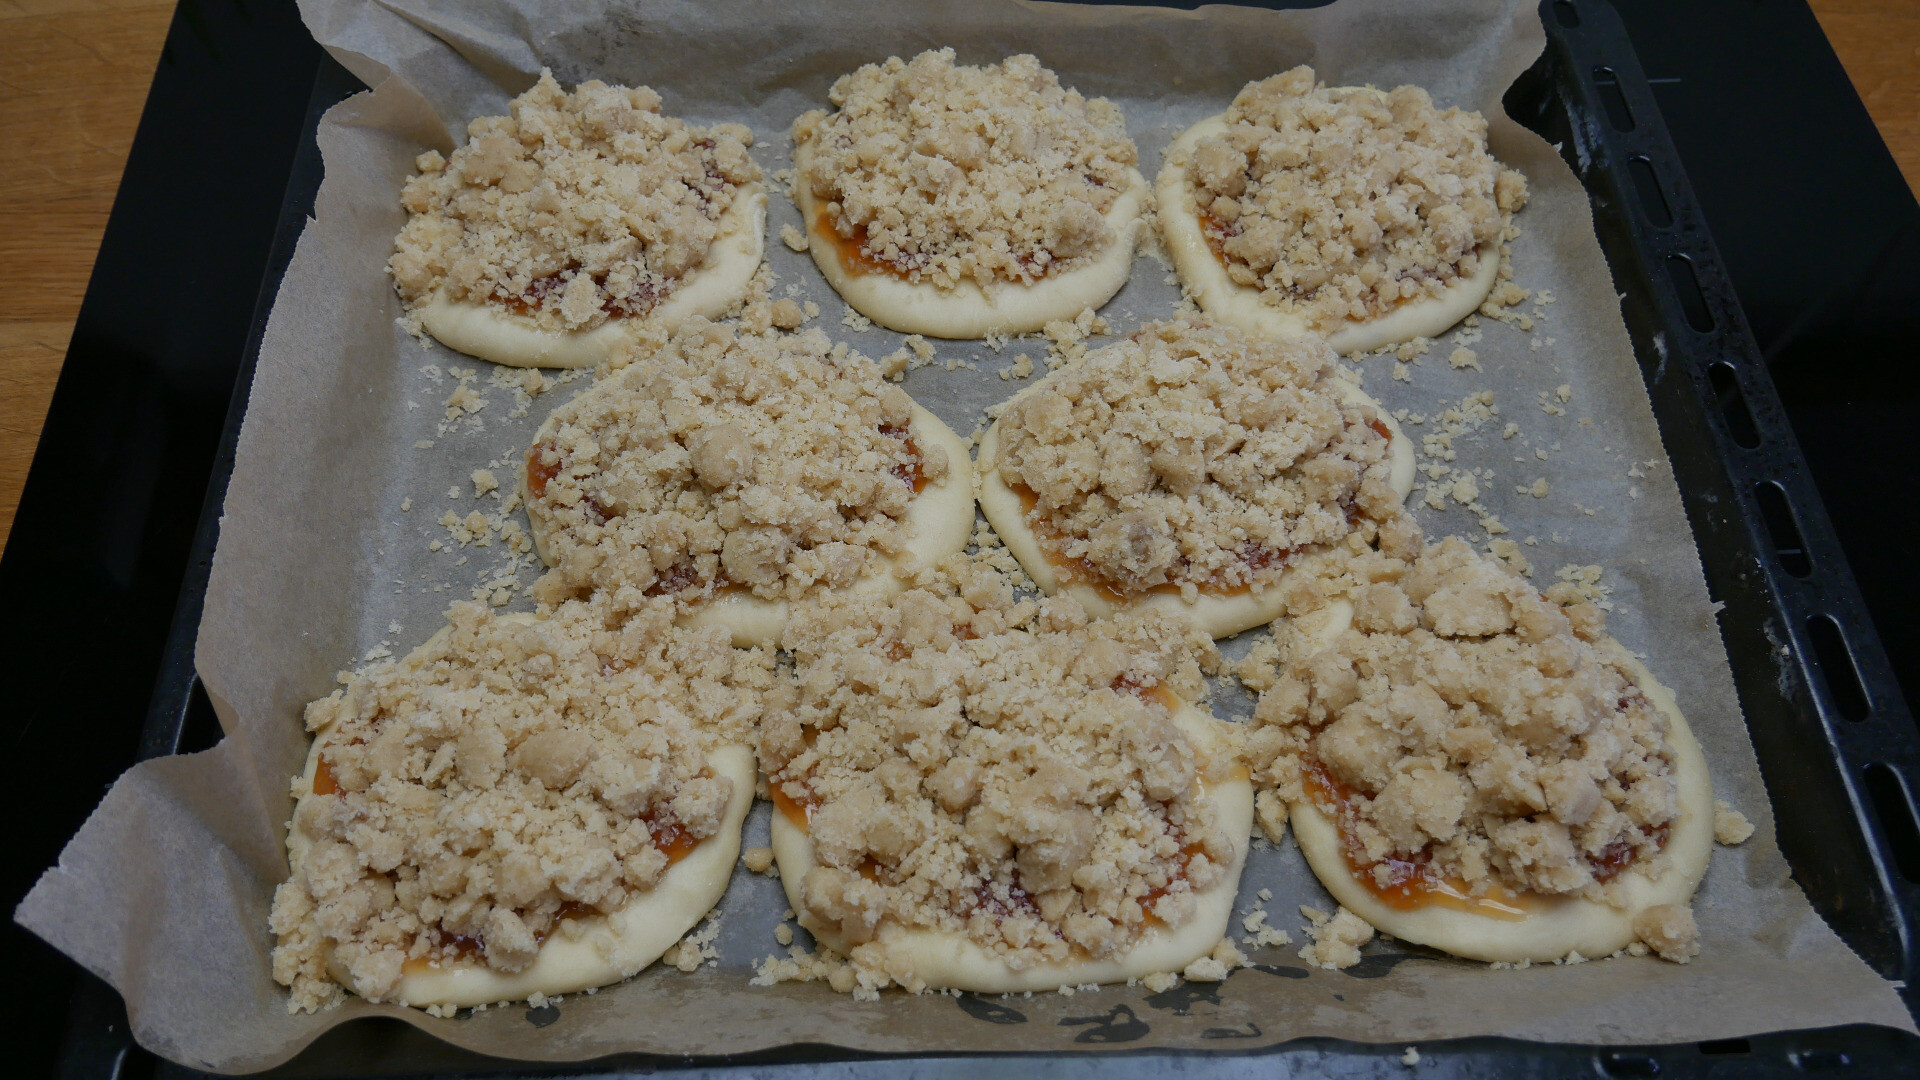 unbaked crumbles on dough with jelly